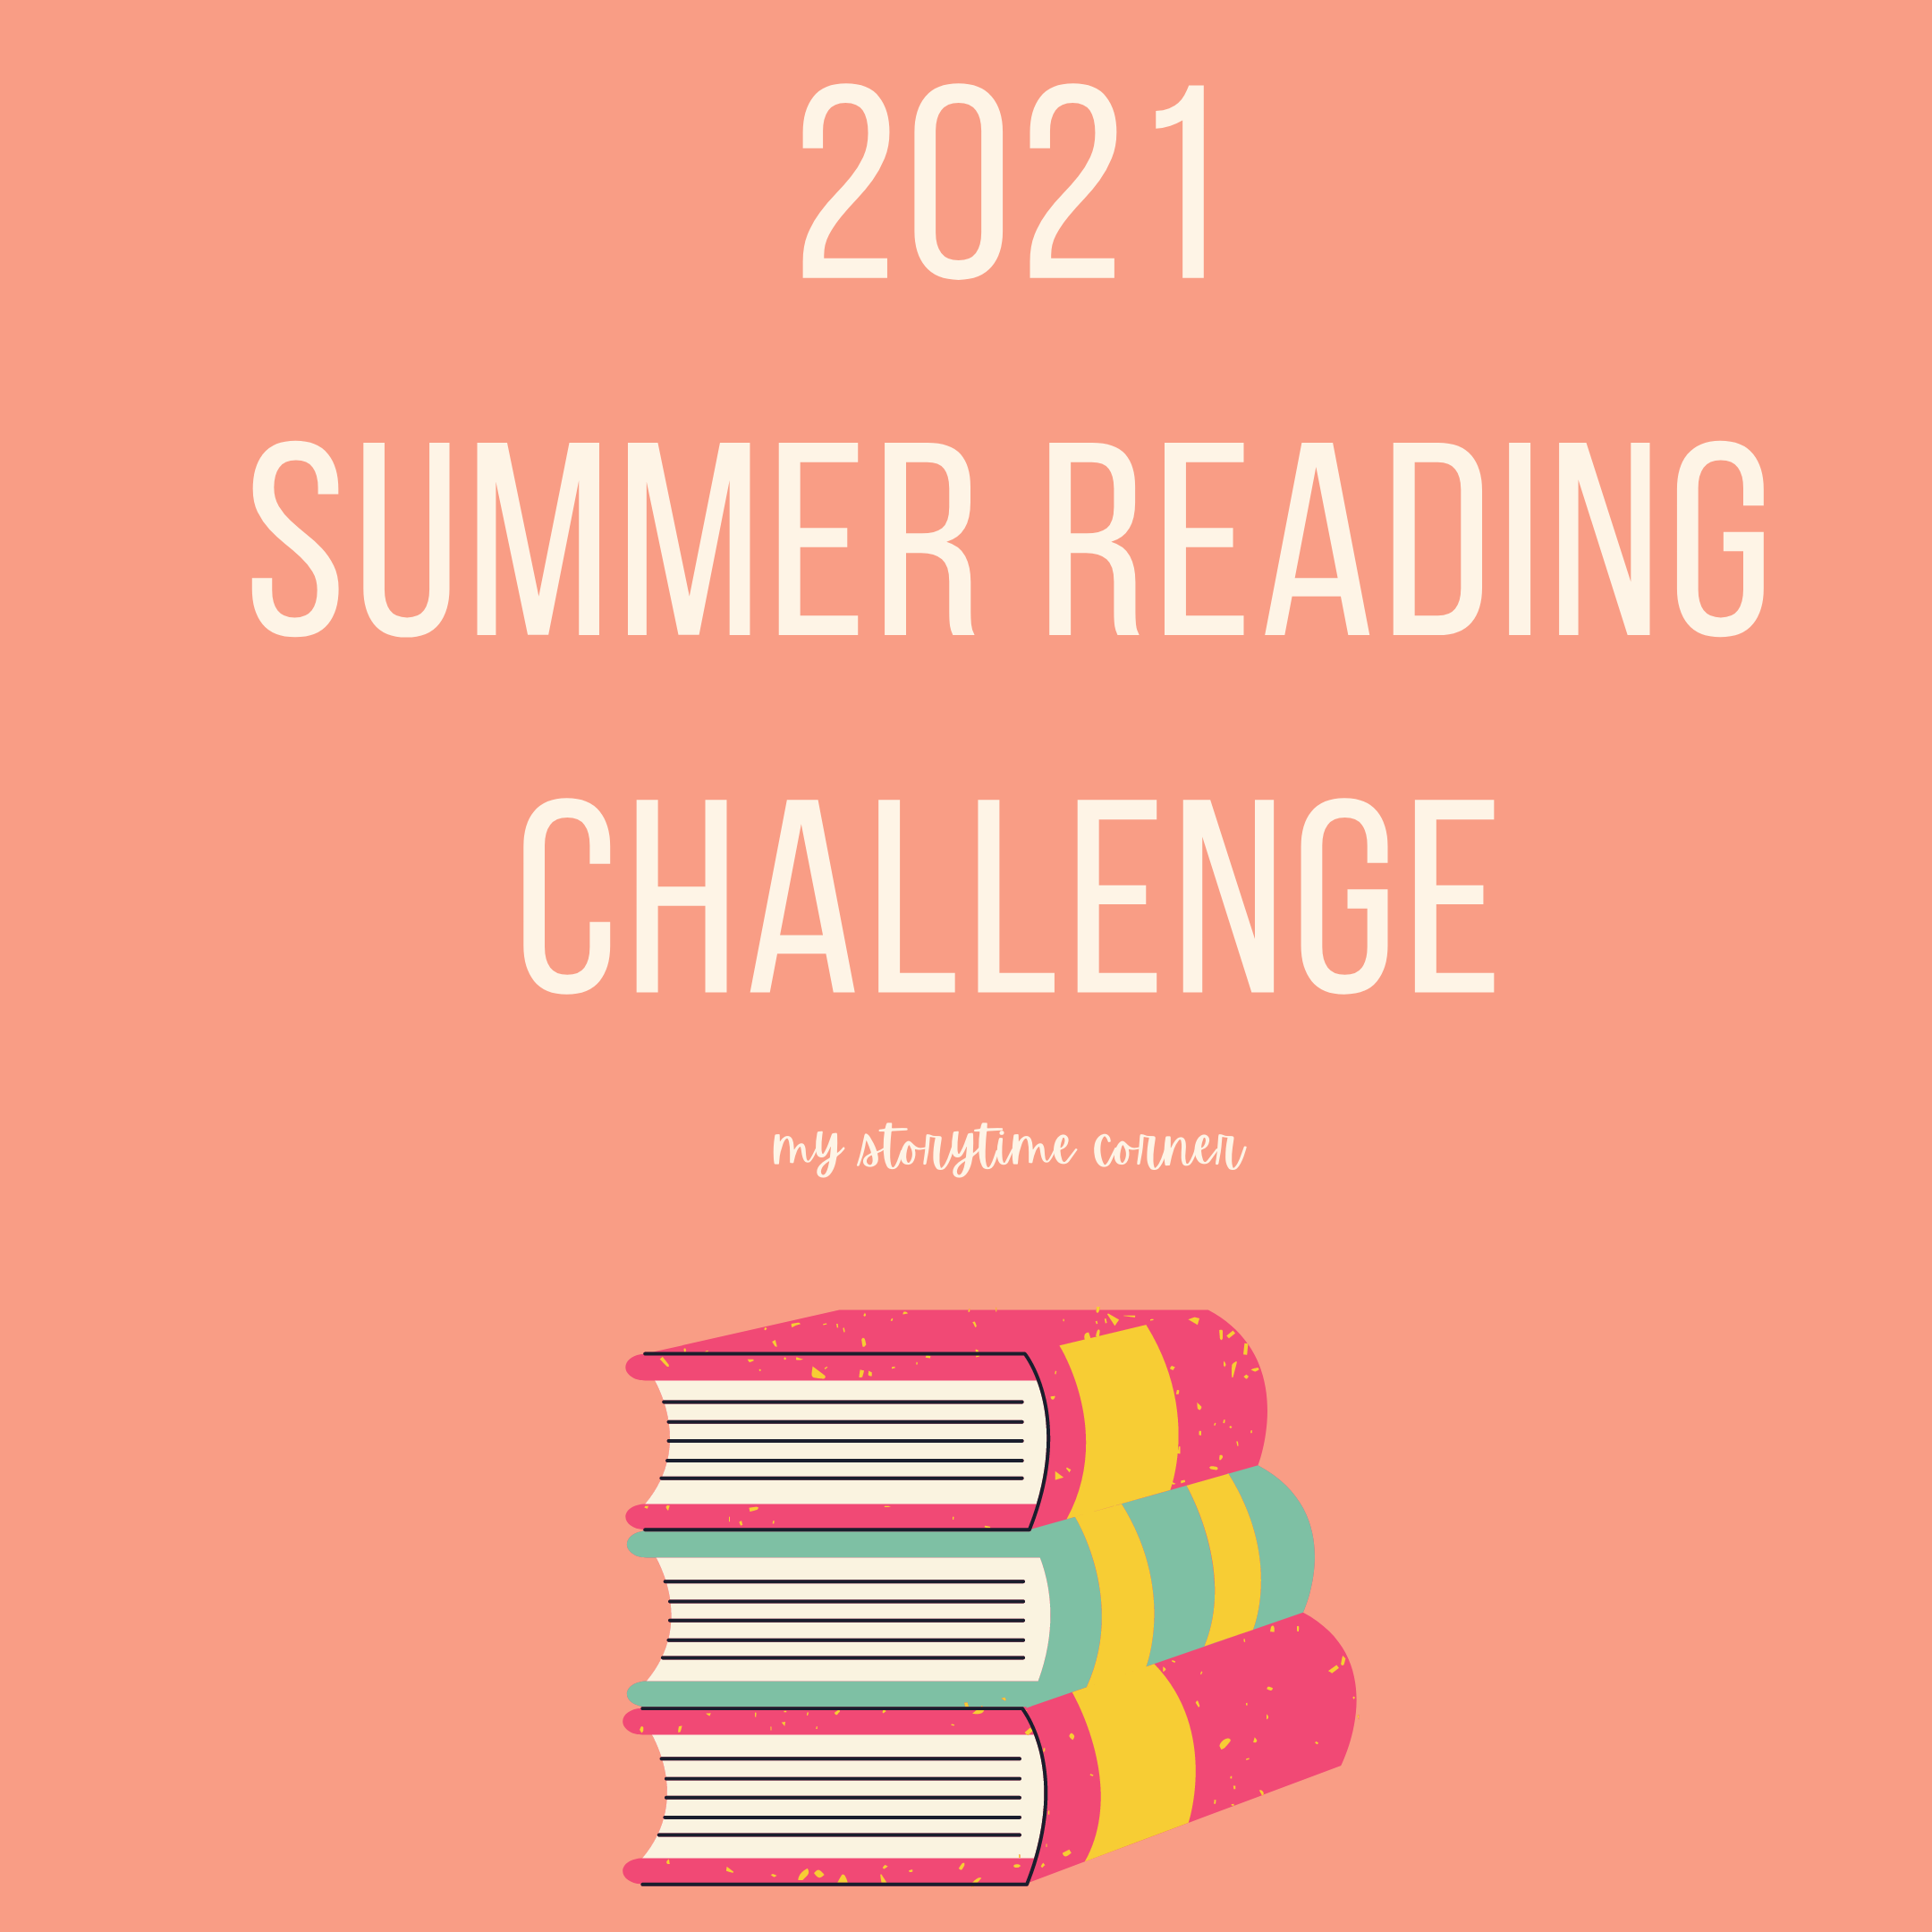 Summer Reading Challenge with Printable